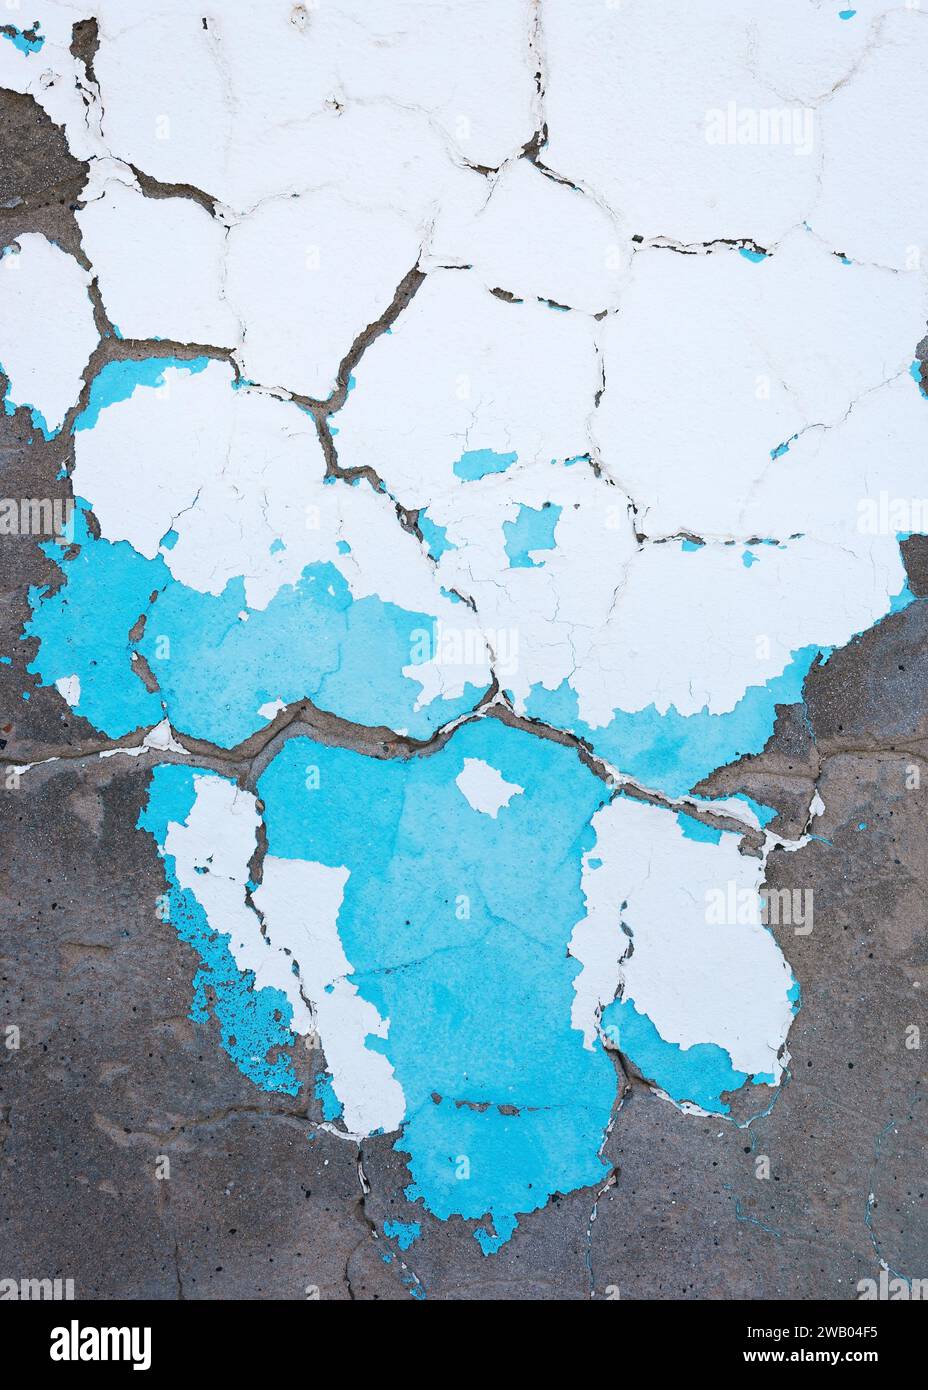 Abstract vertical background of shabby concrete wall surface with bright turquoise and white paint and weathered parts. Stock Photo